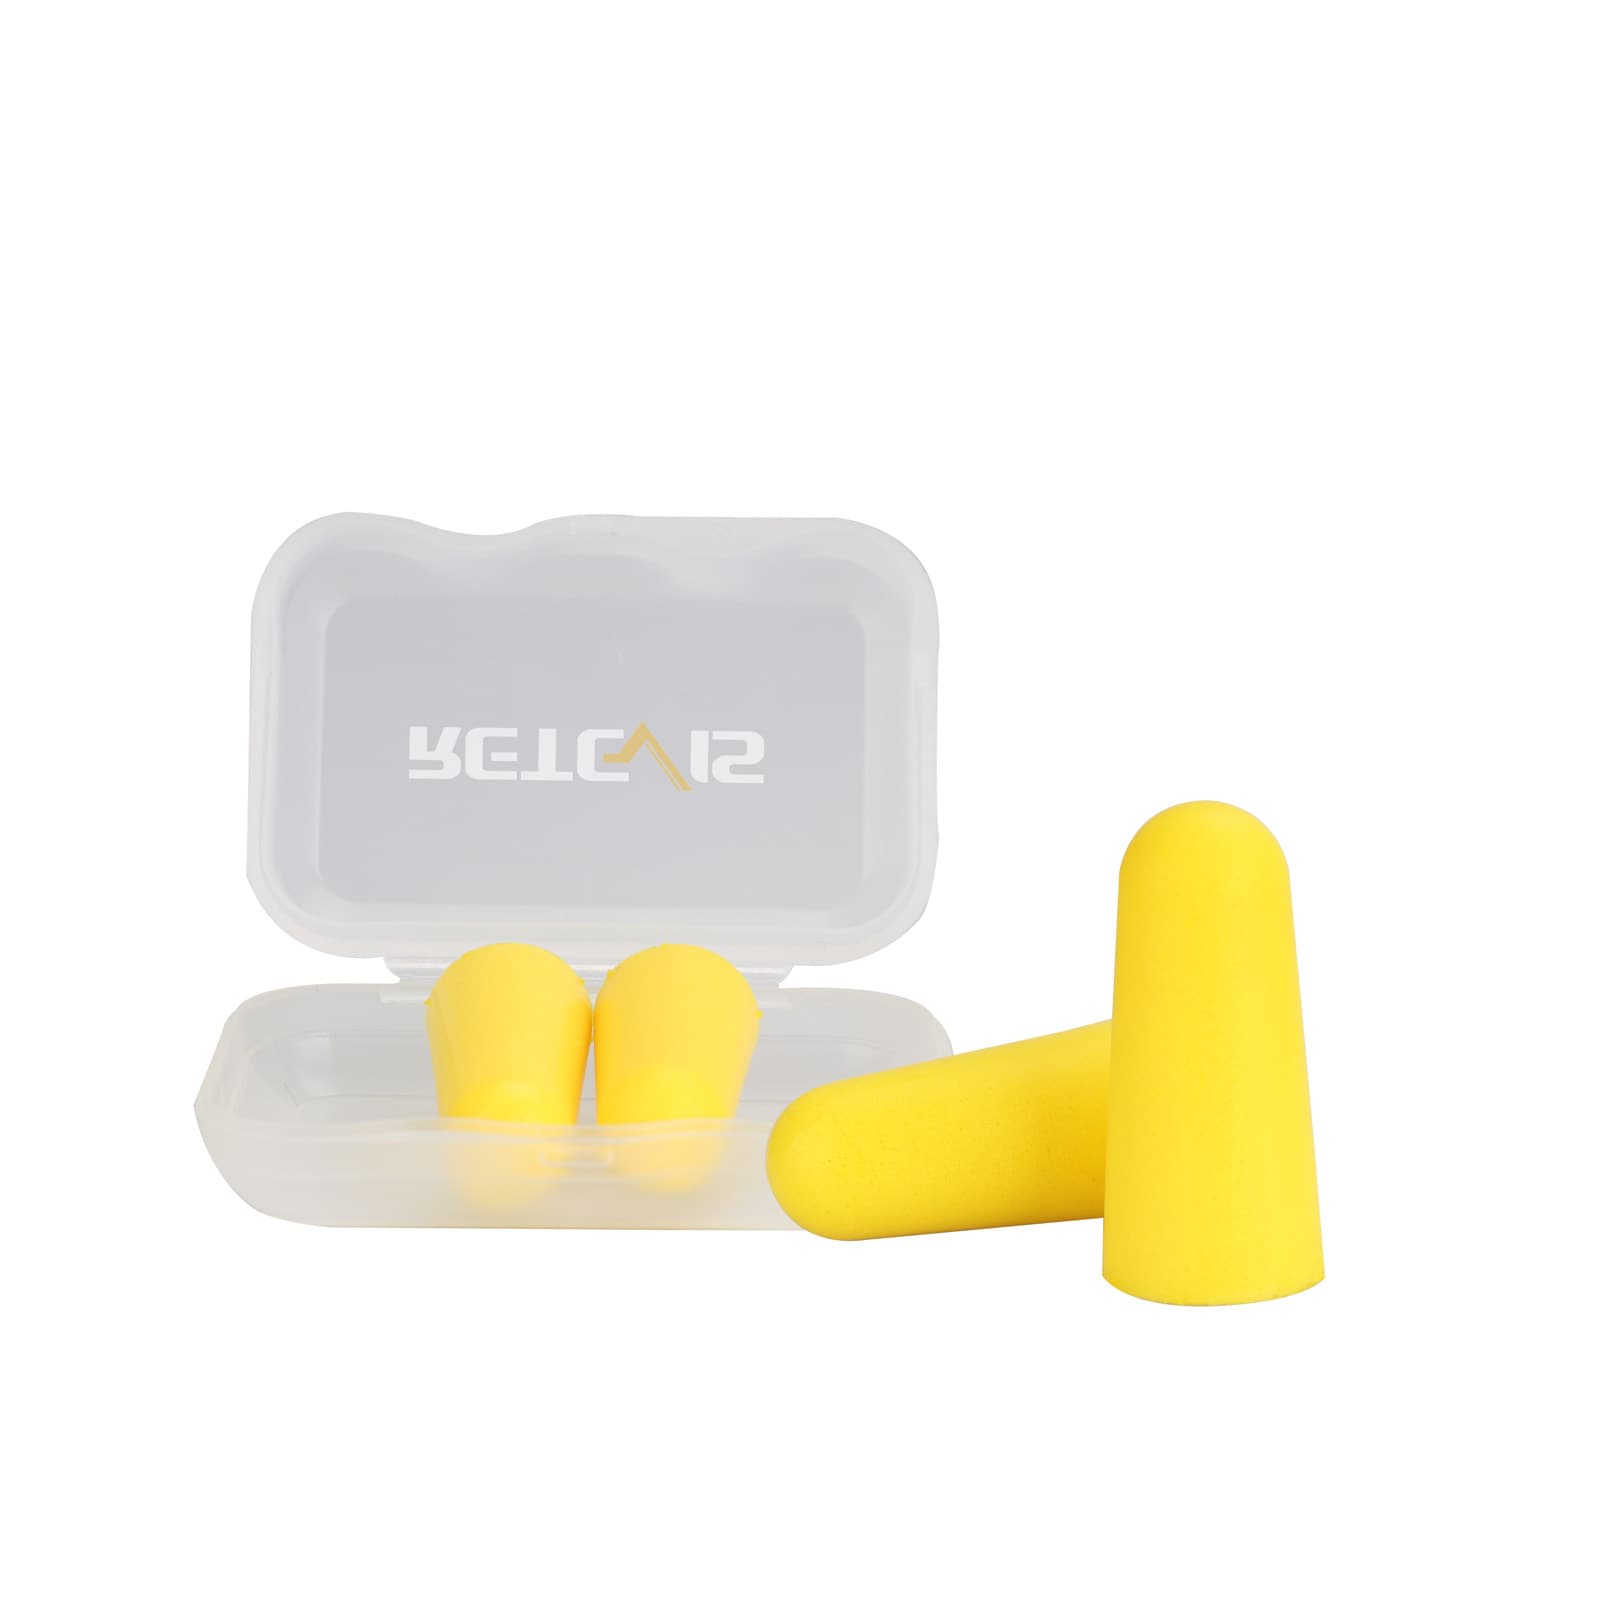 31dB Ultra Soft Foam Earplugs 60 Pairs with Carry Case for shooting